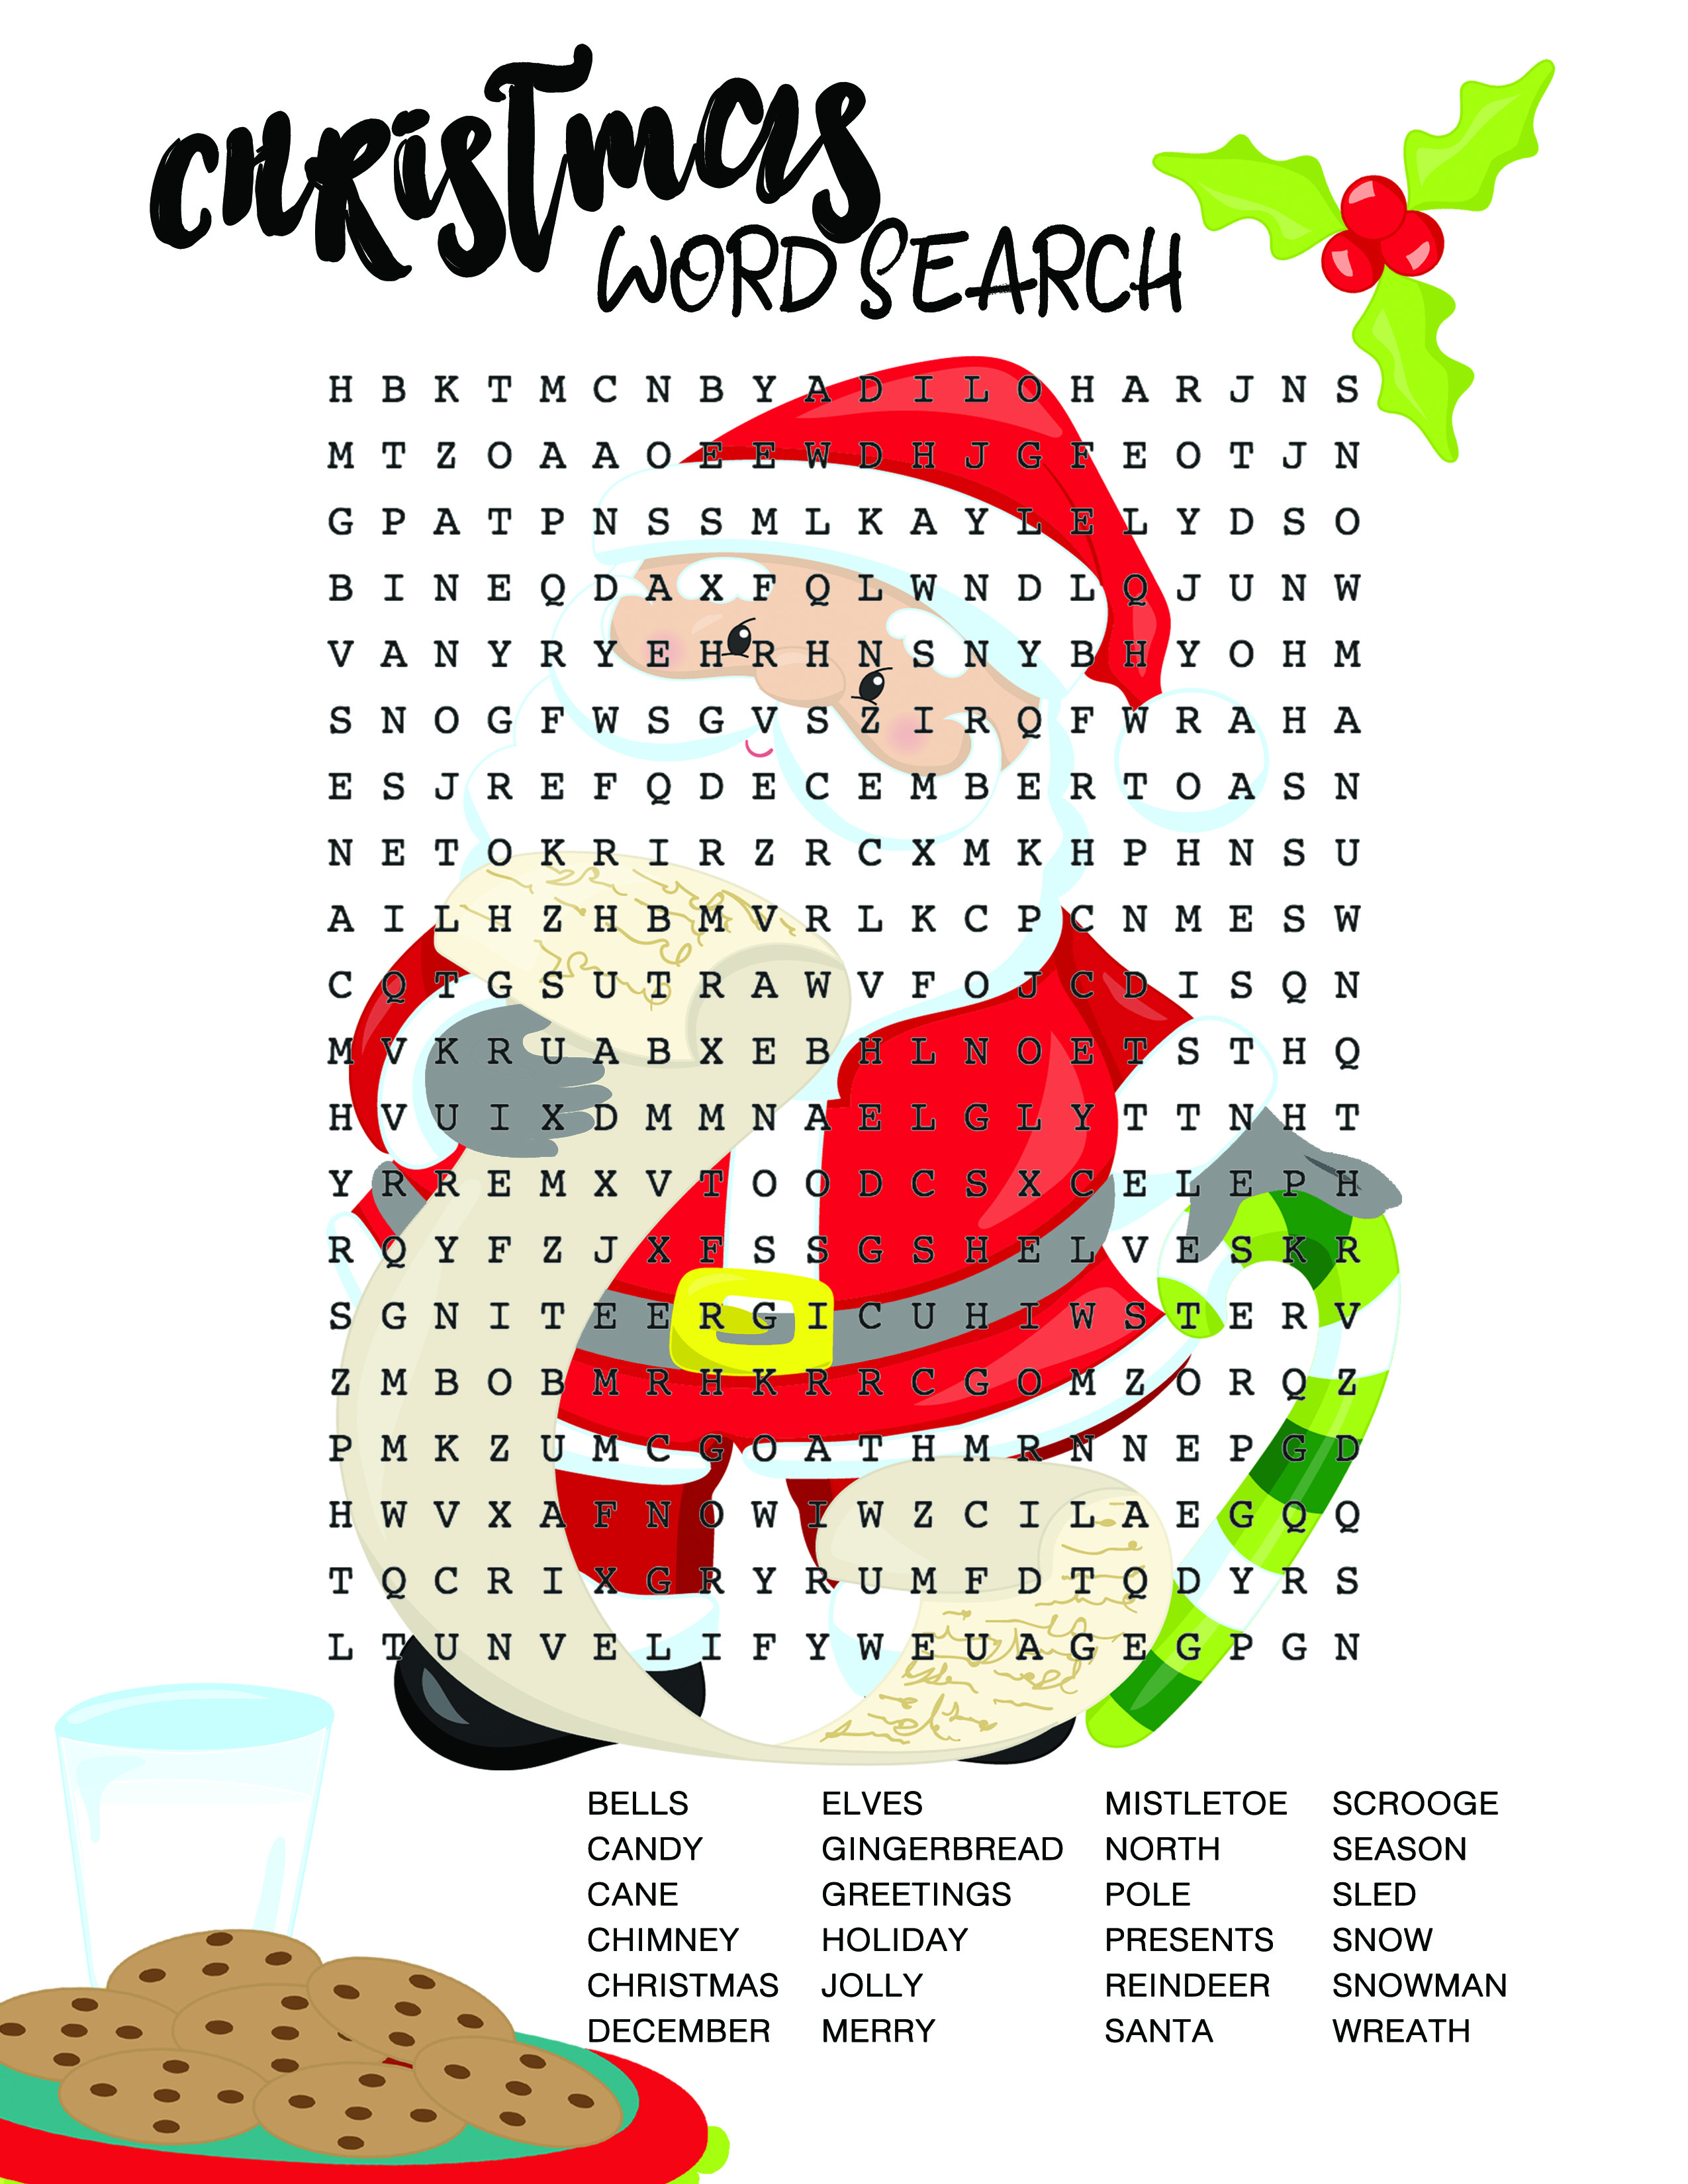 Looking for Christmas themed activities for your children ? Why not celebrate the Christmas season with this Santa Word Search. This free Christmas printable brings a little fun into your child's day and helps exercise their minds.